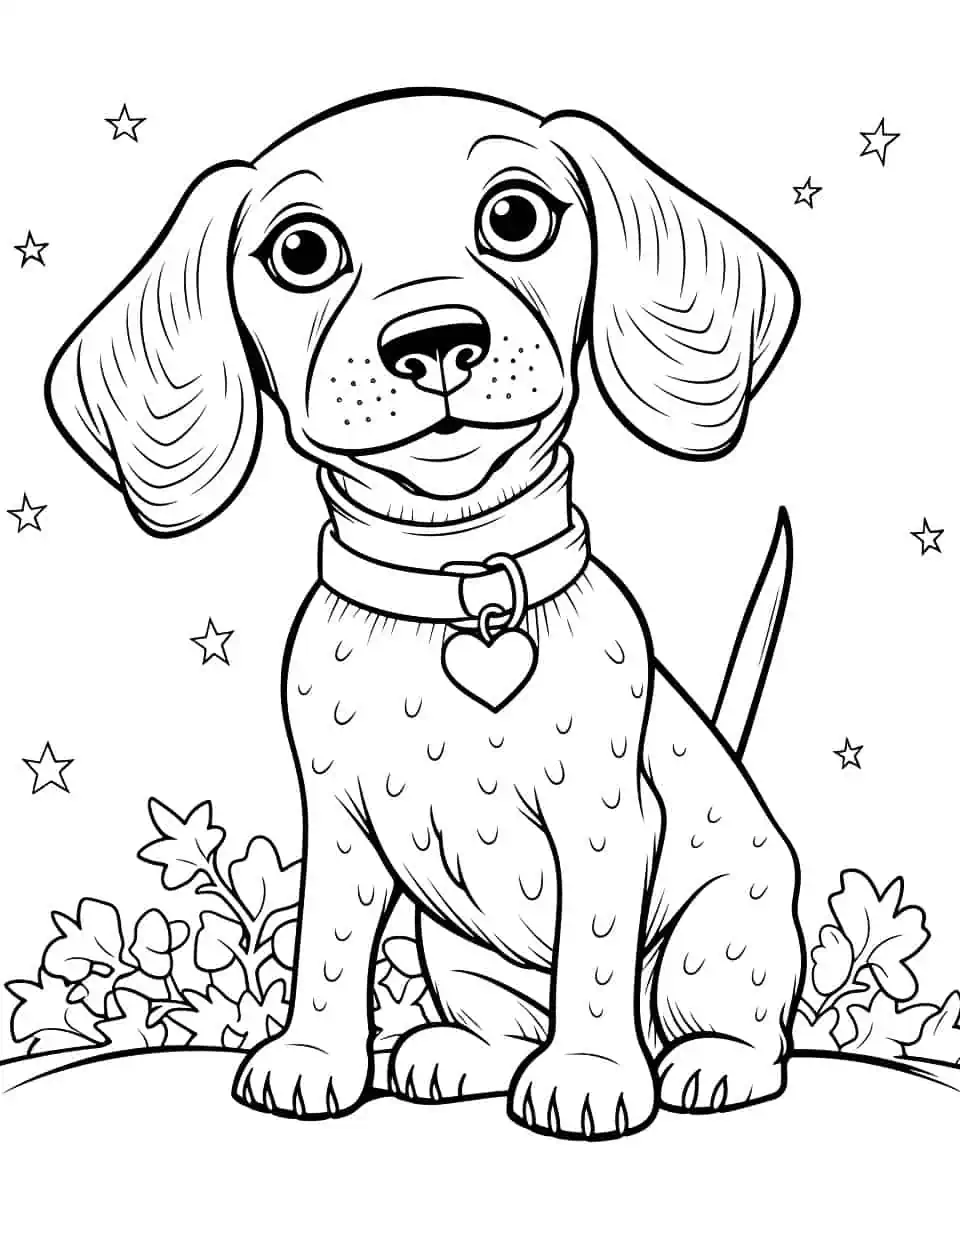 Christmas Dachshund Dog Coloring Page - A Dachshund wearing a Christmas sweater with Christmas stars in the background.